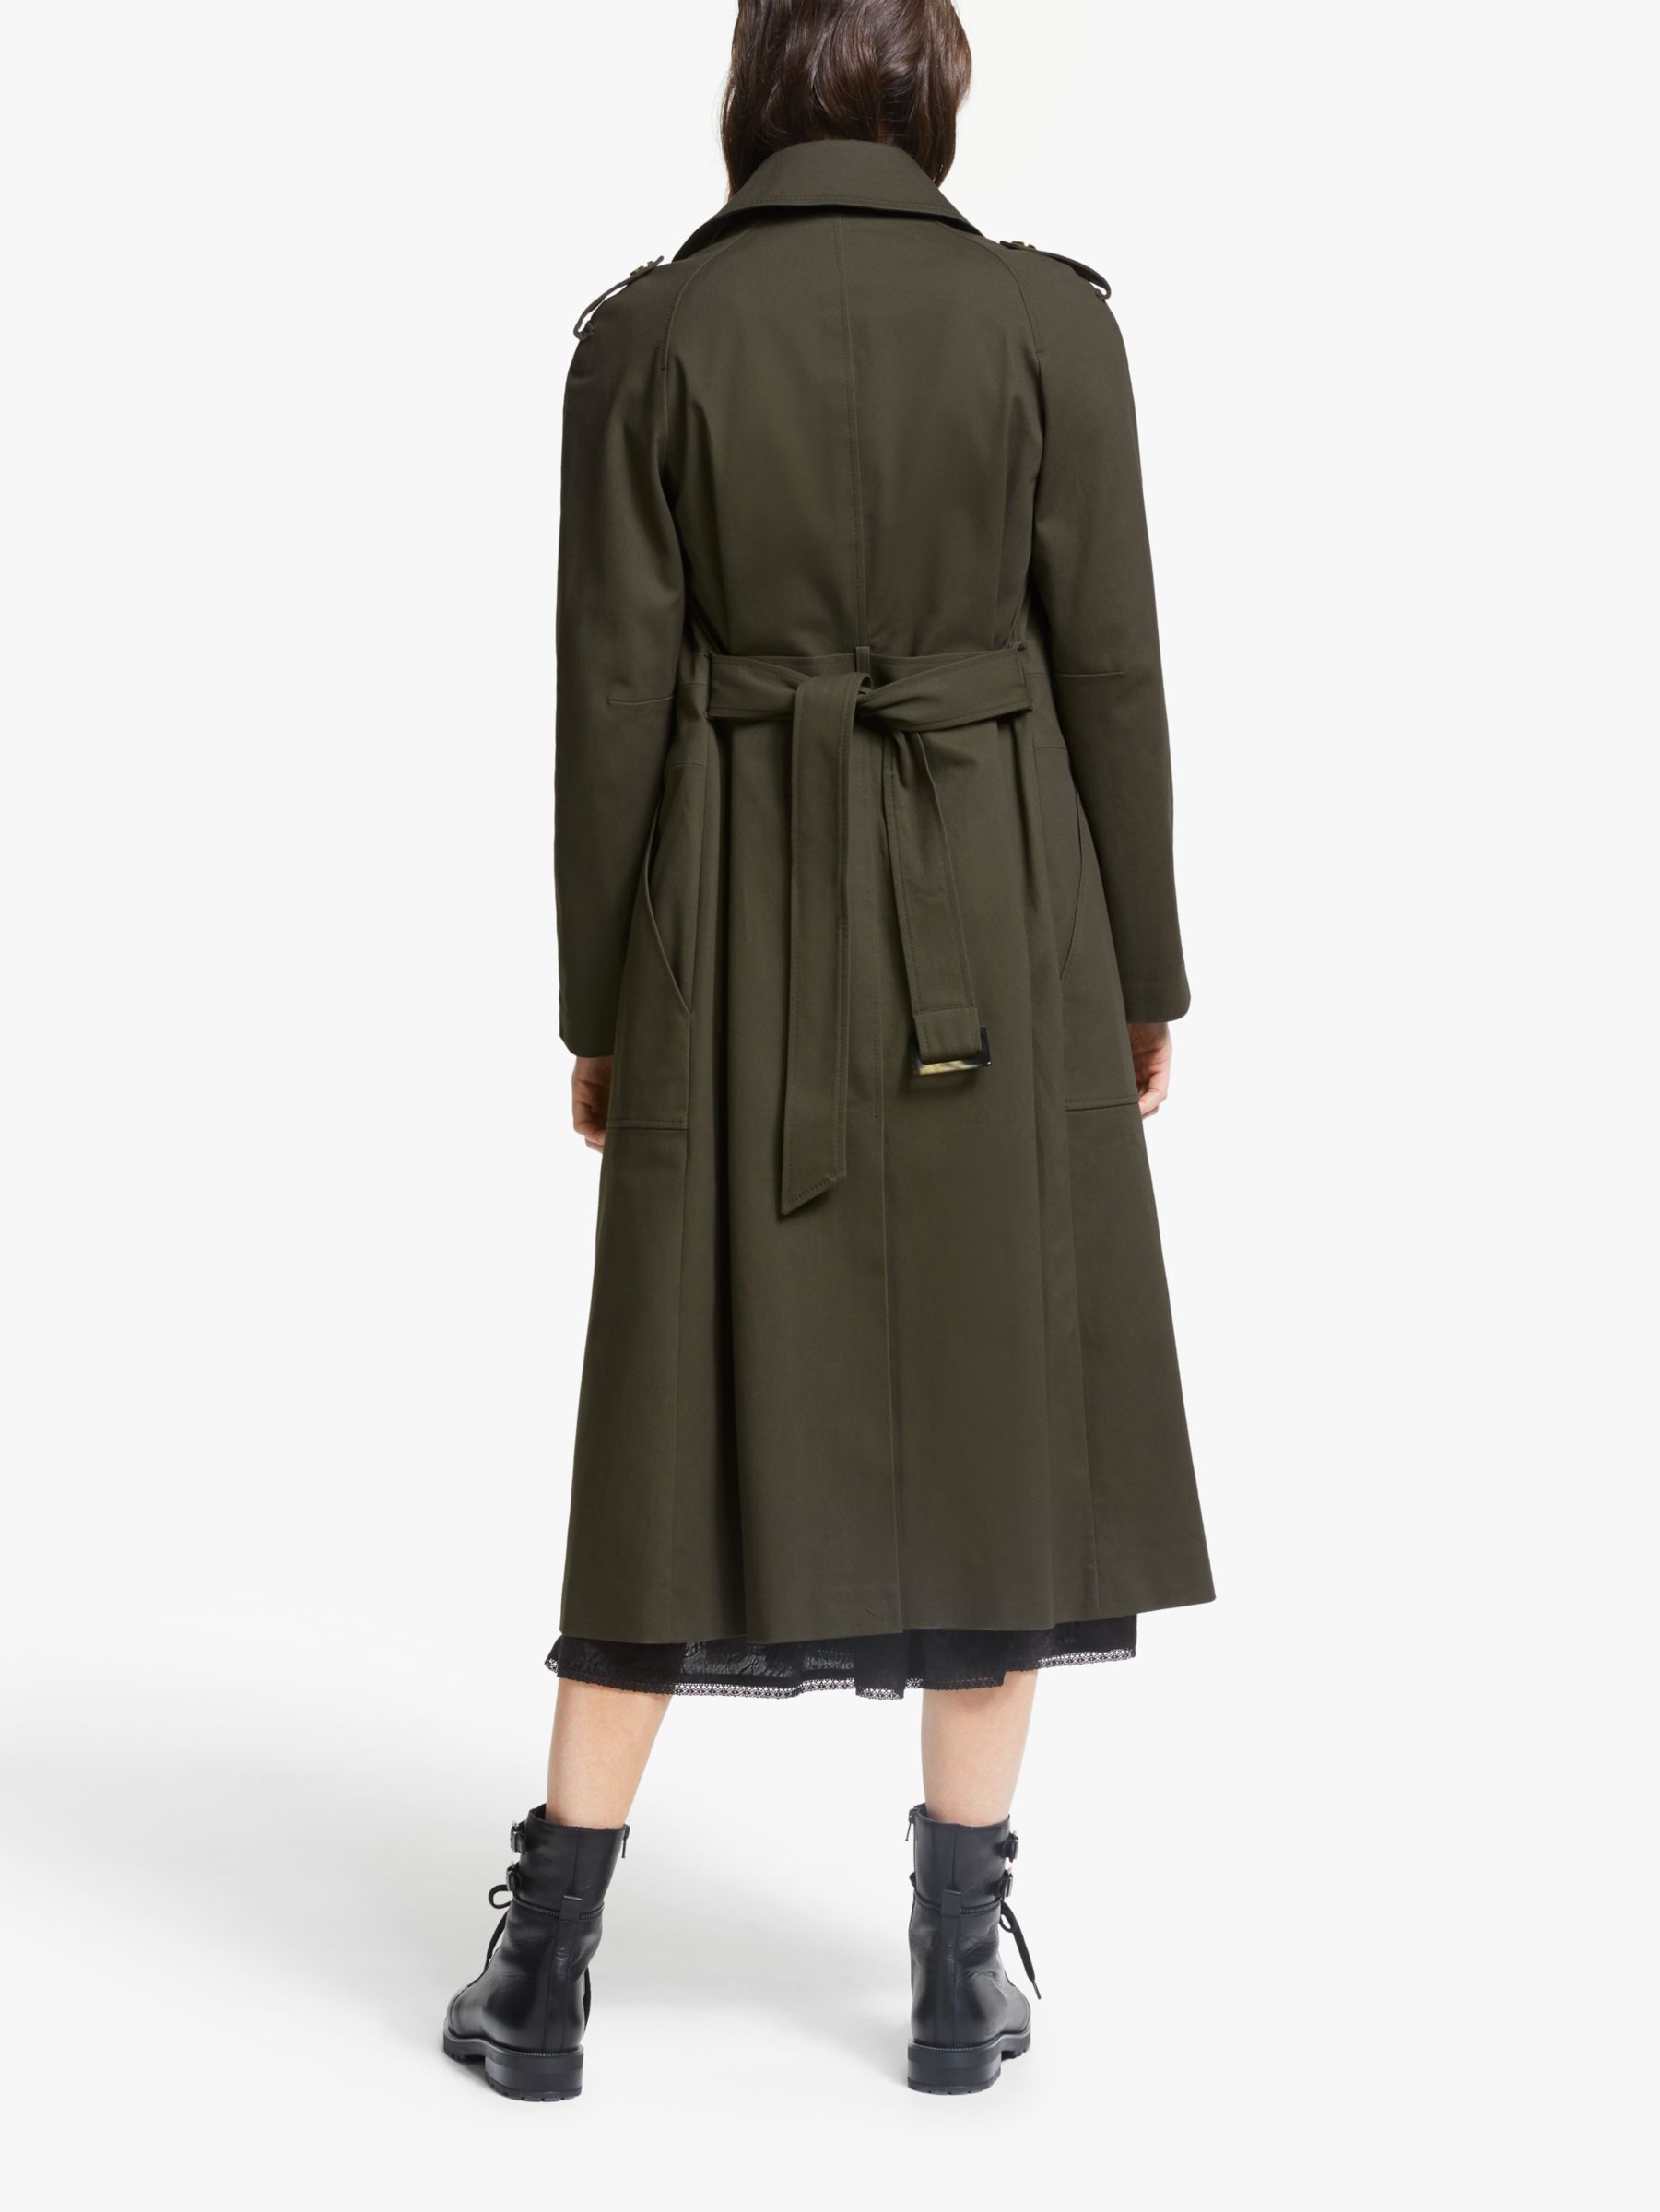 Somerset by Alice Temperley Trench Coat, Khaki at John Lewis & Partners